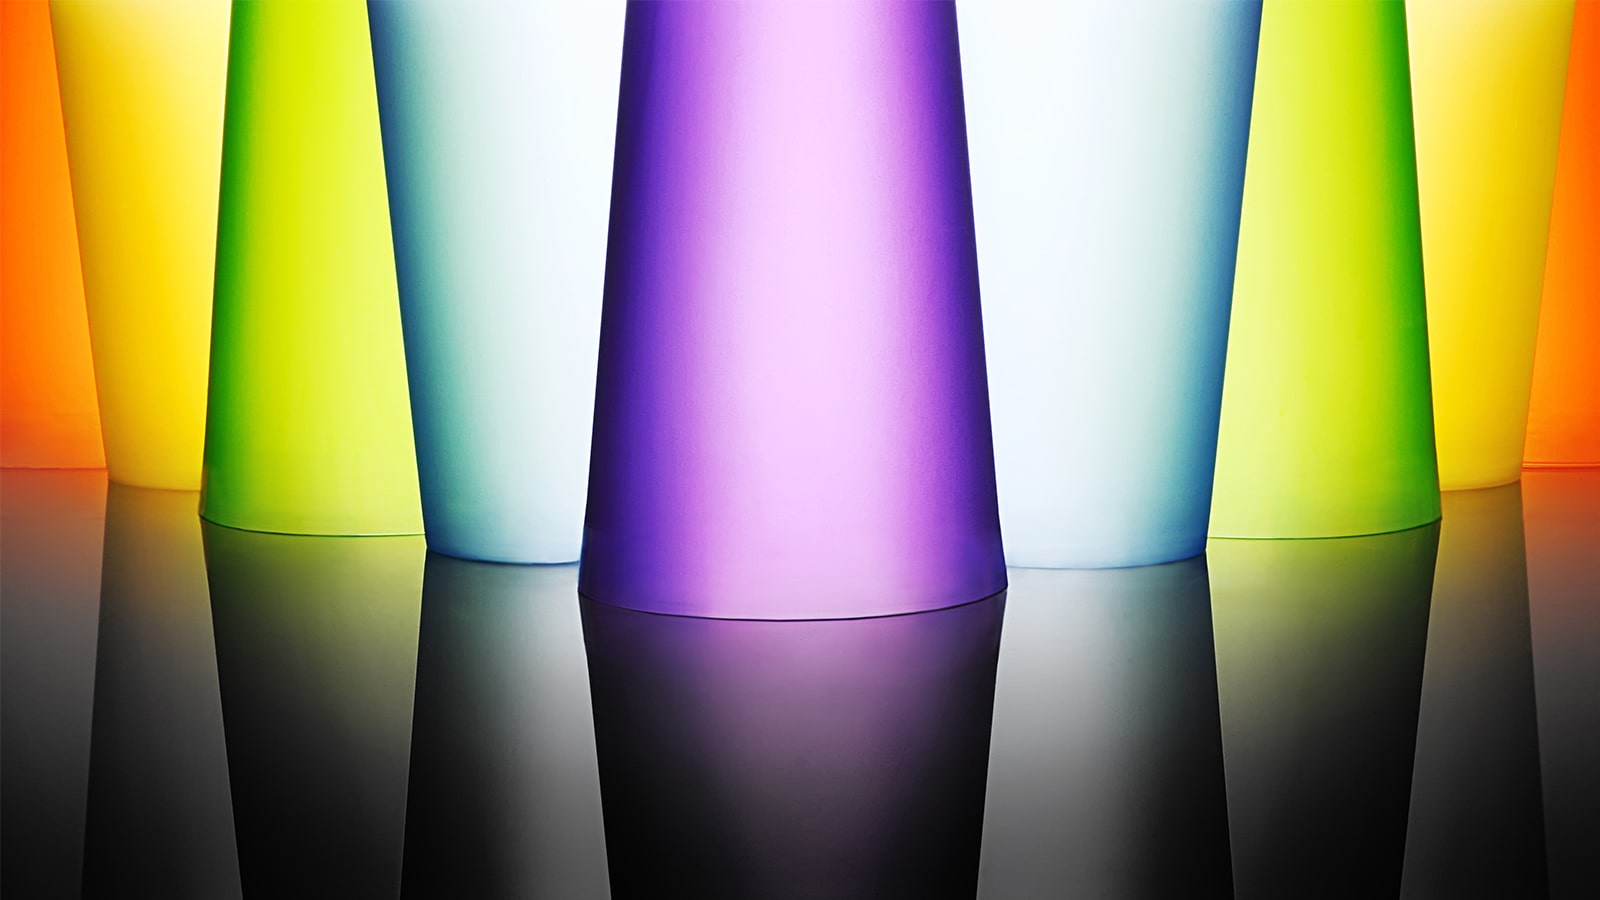 "gjt An image that bright and colorful glass cups."